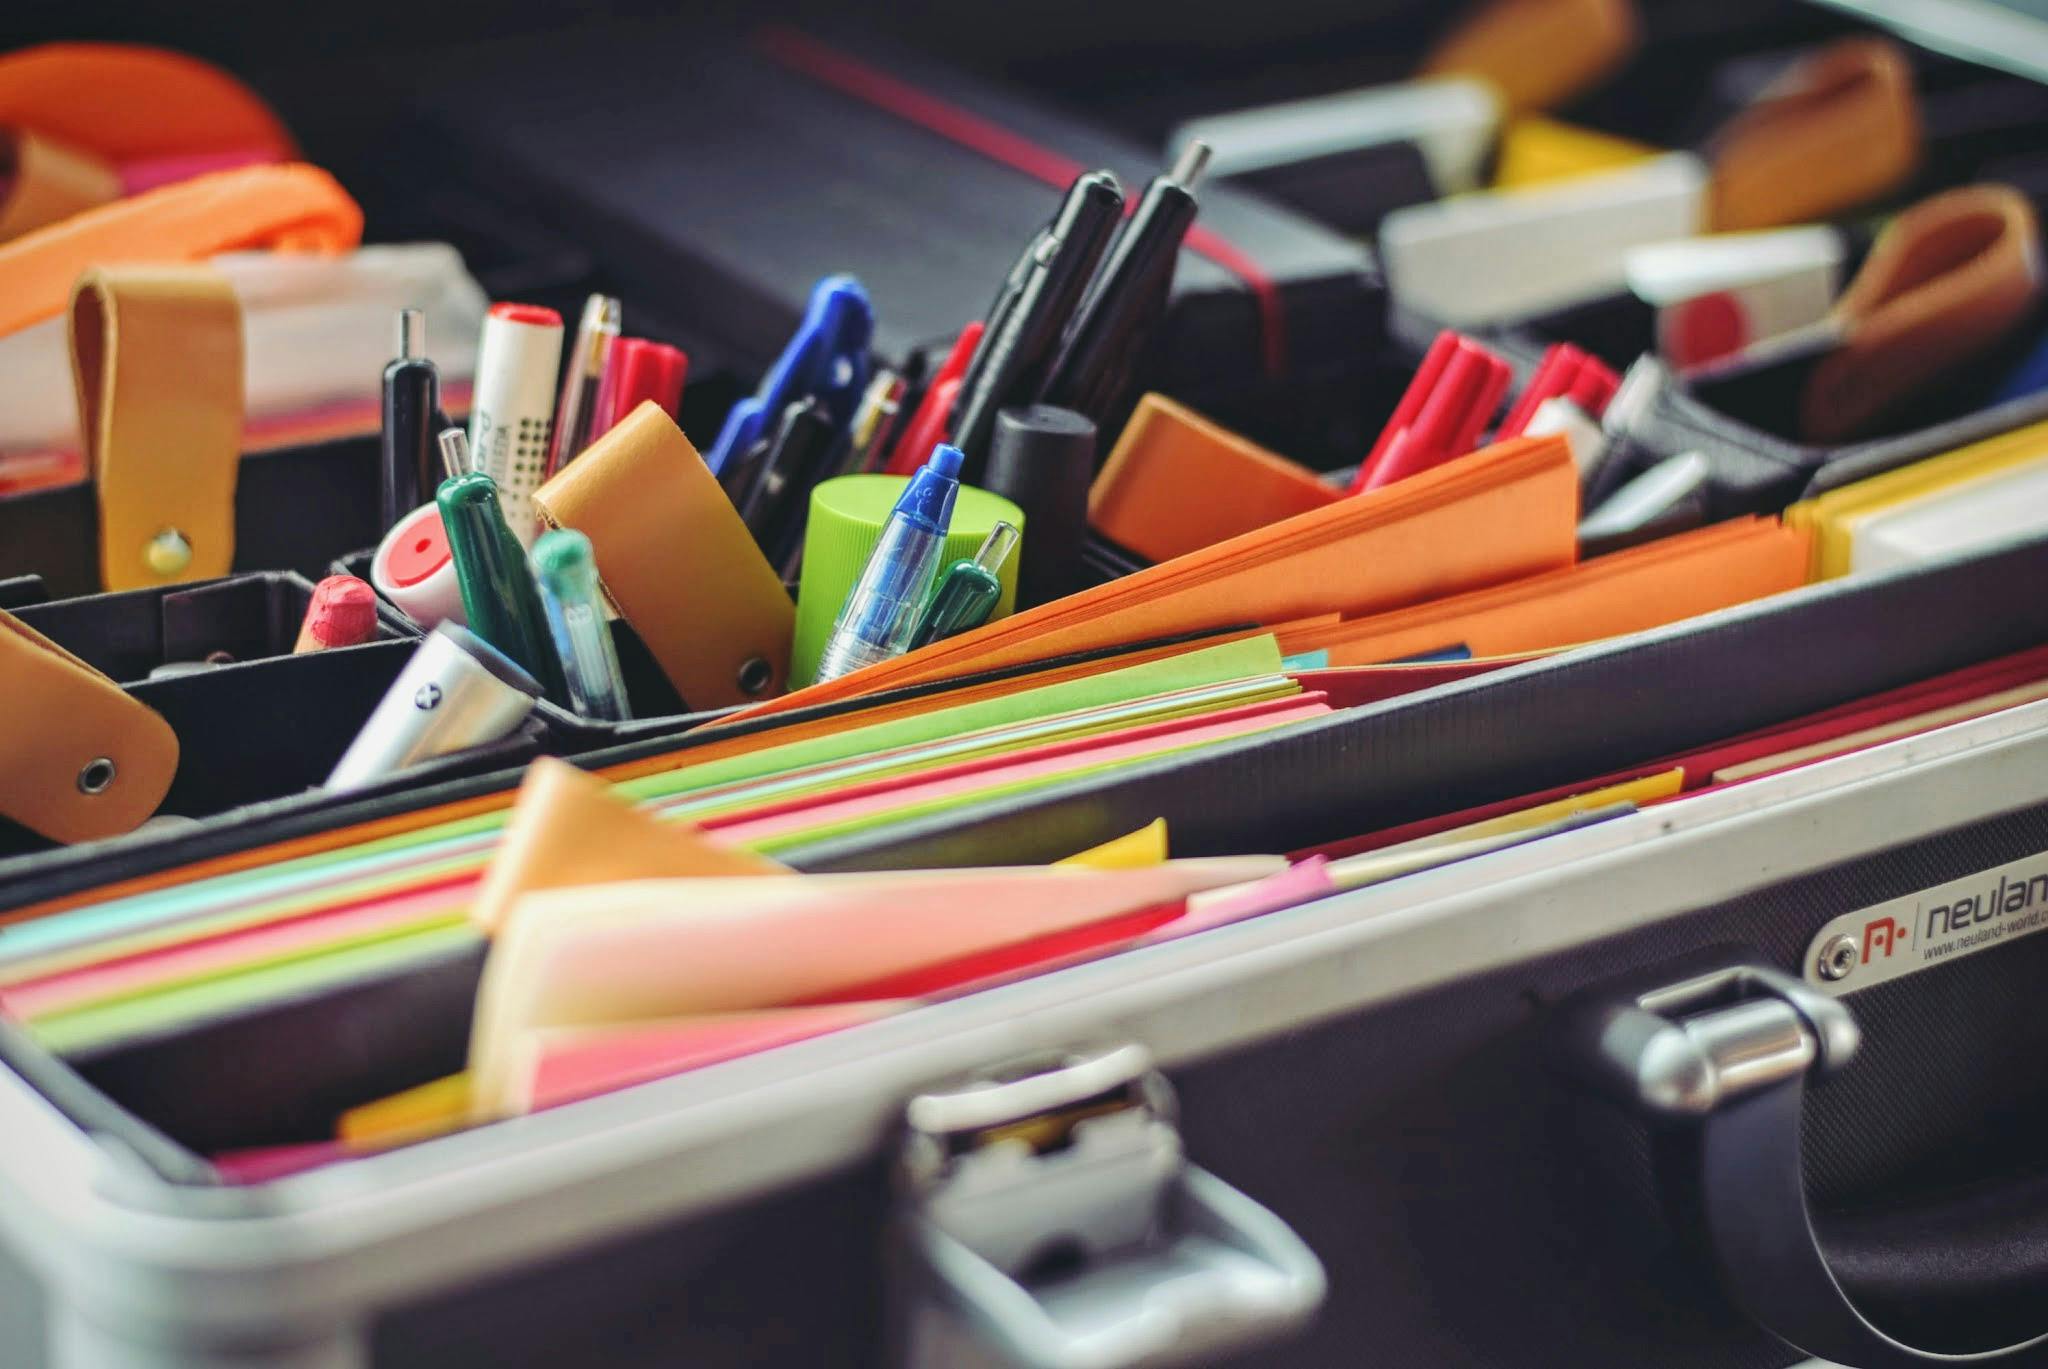  Supply Innovation: The Newest Office Supplies to Enhance Your Workday